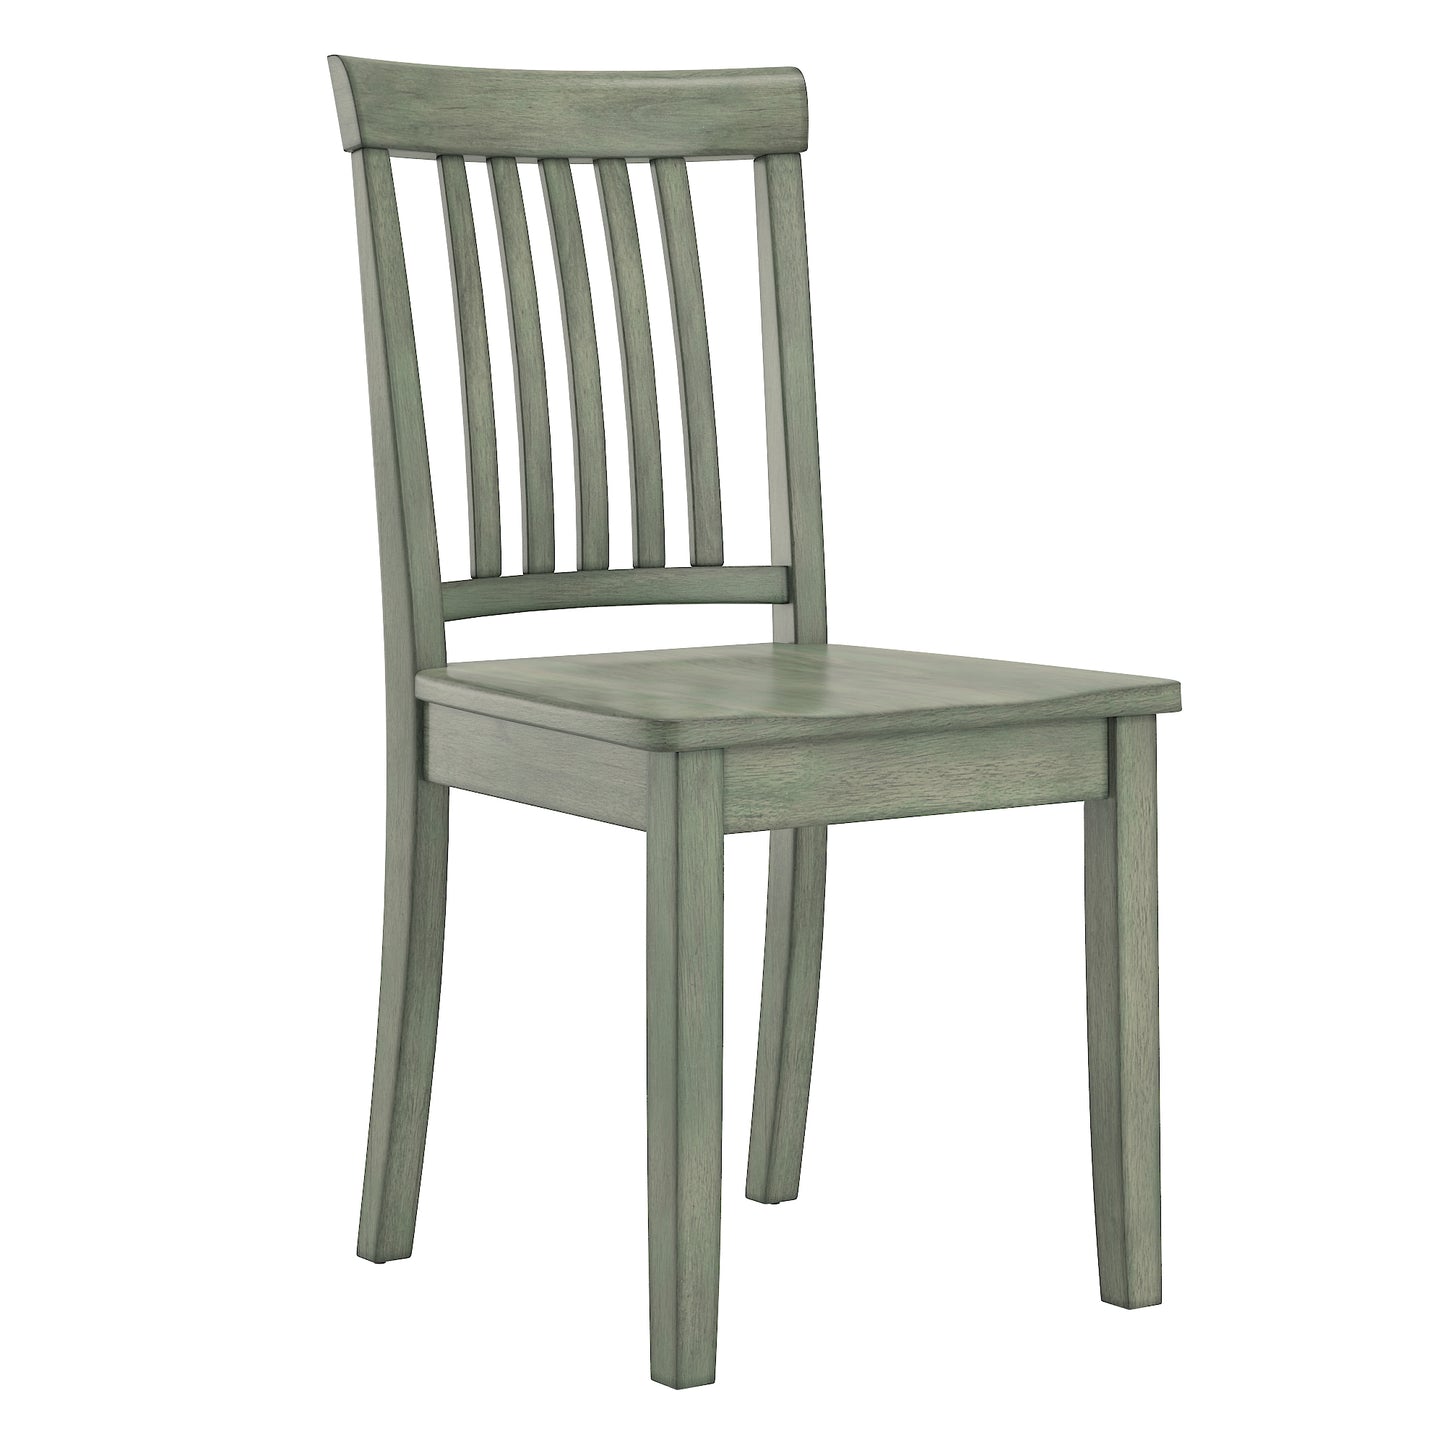 Mission Back Wood Dining Chairs (Set of 2) - Antique Sage Finish